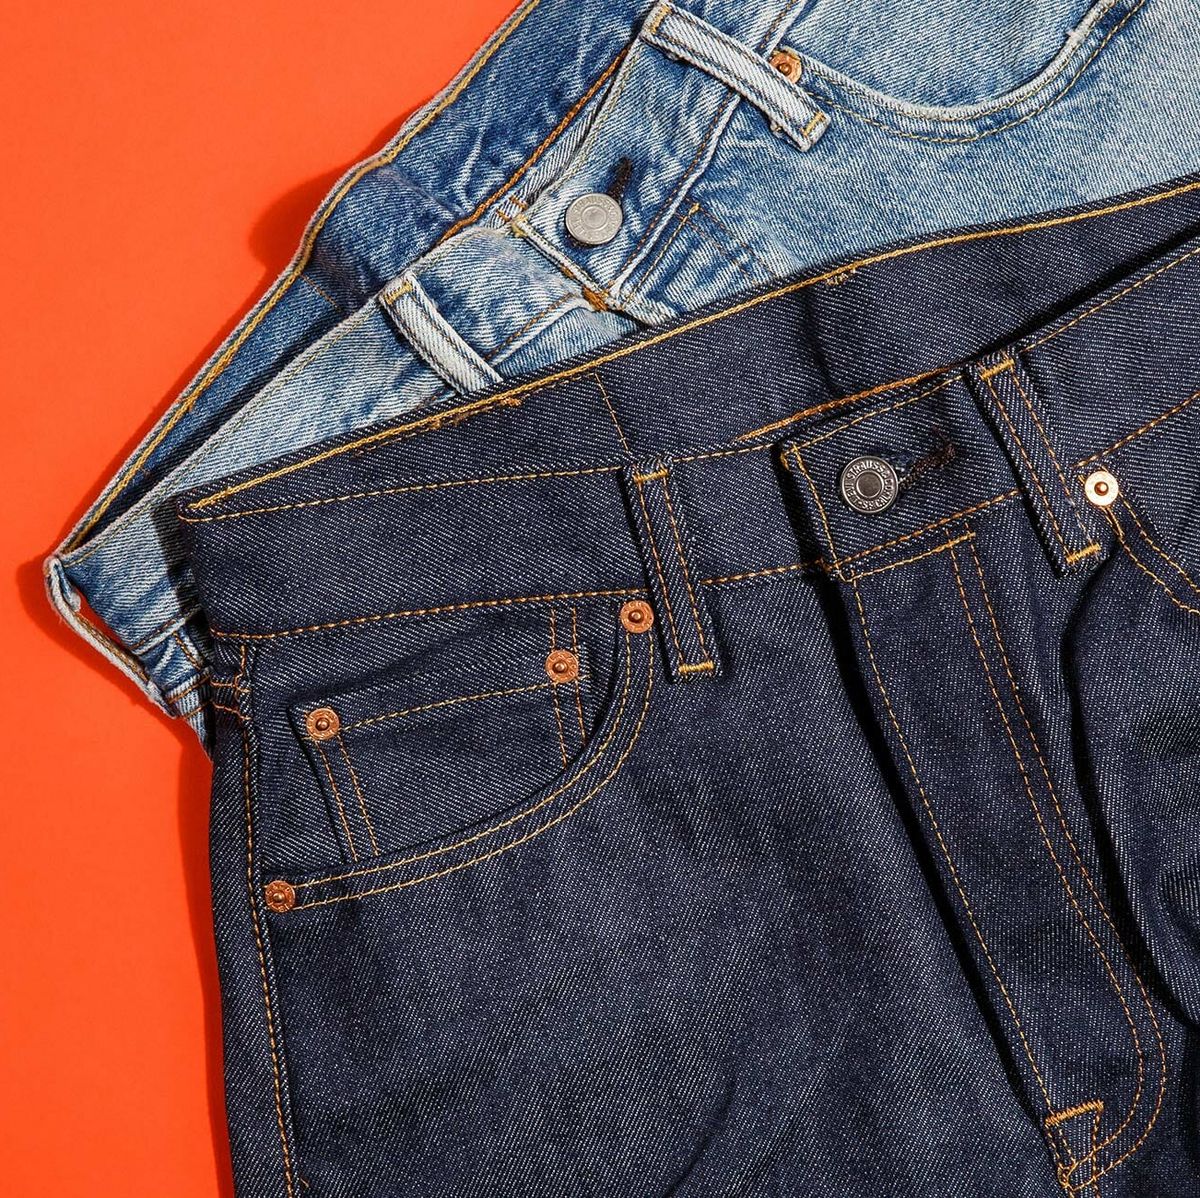 Levi'S 501 Review: Is The Original Blue Jean Any Good?